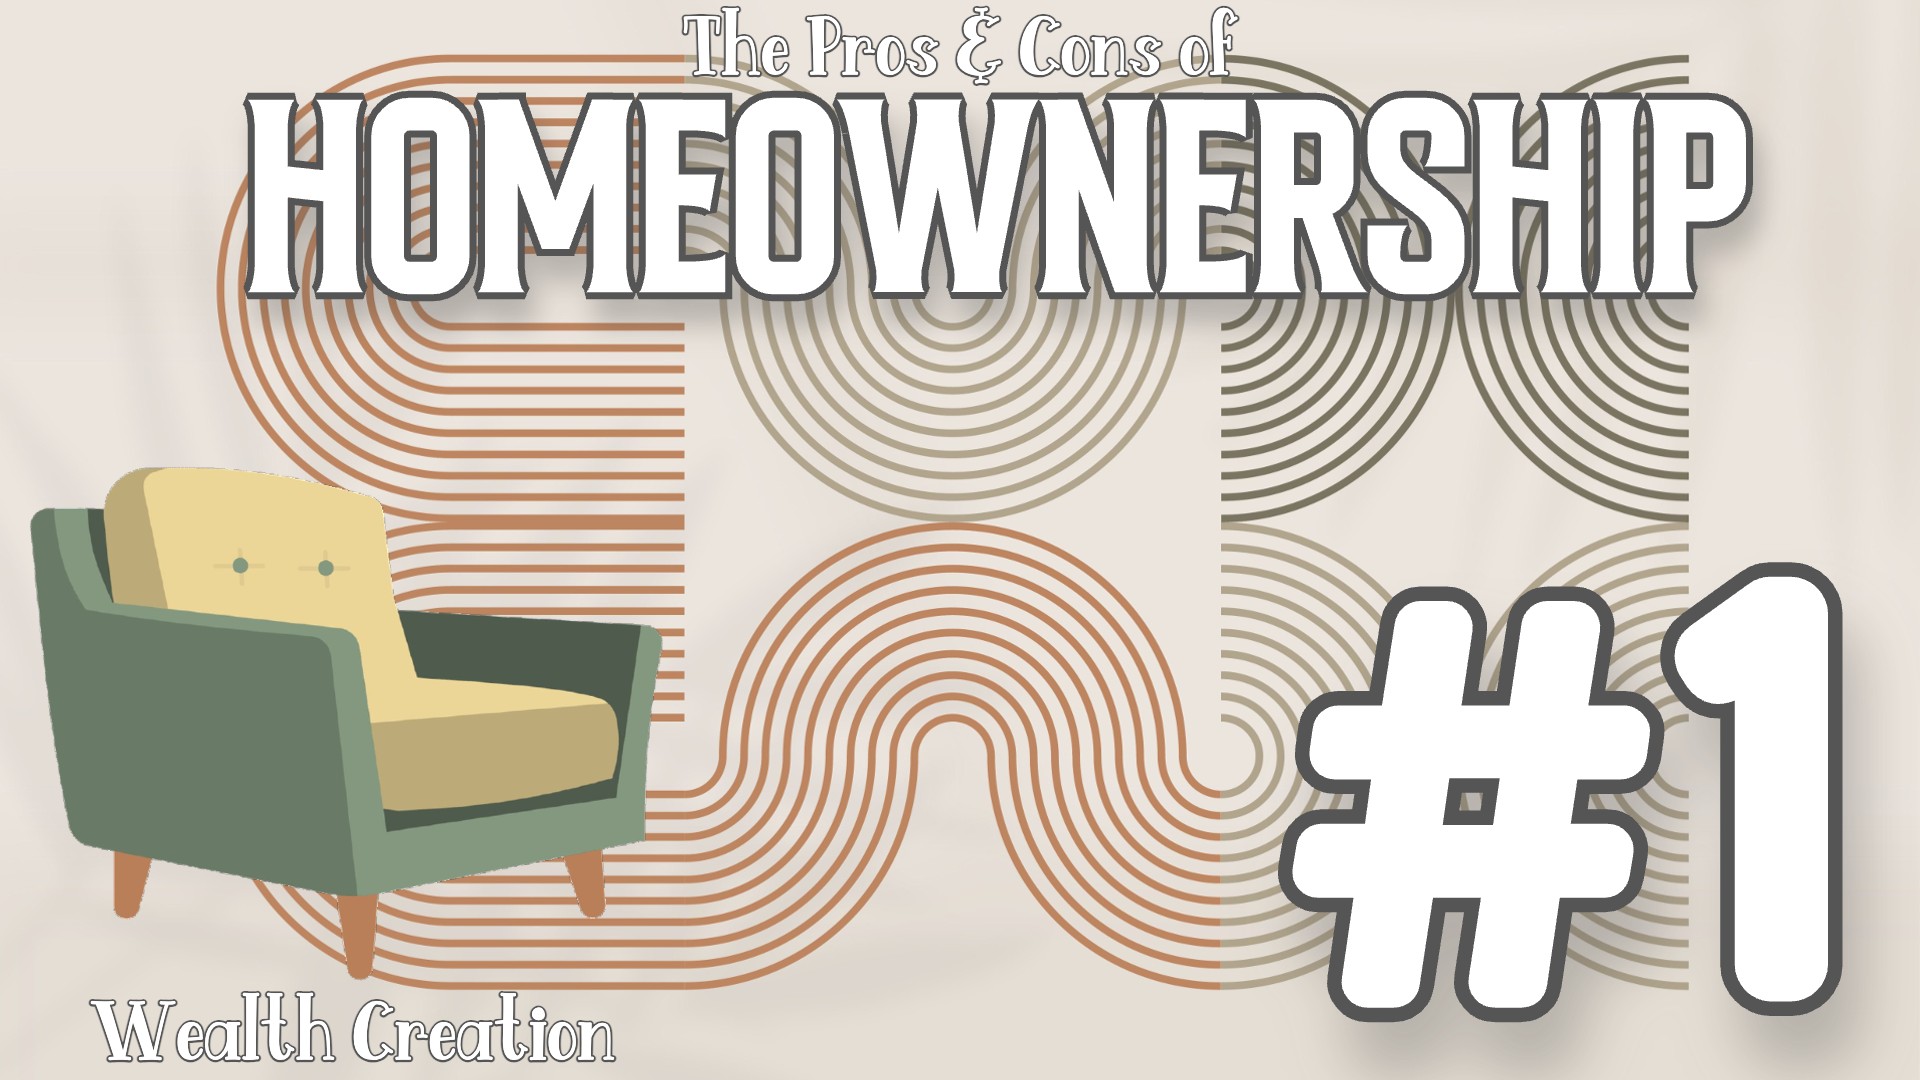 The Pros & Cons of Homeownership 1: Wealth Creation